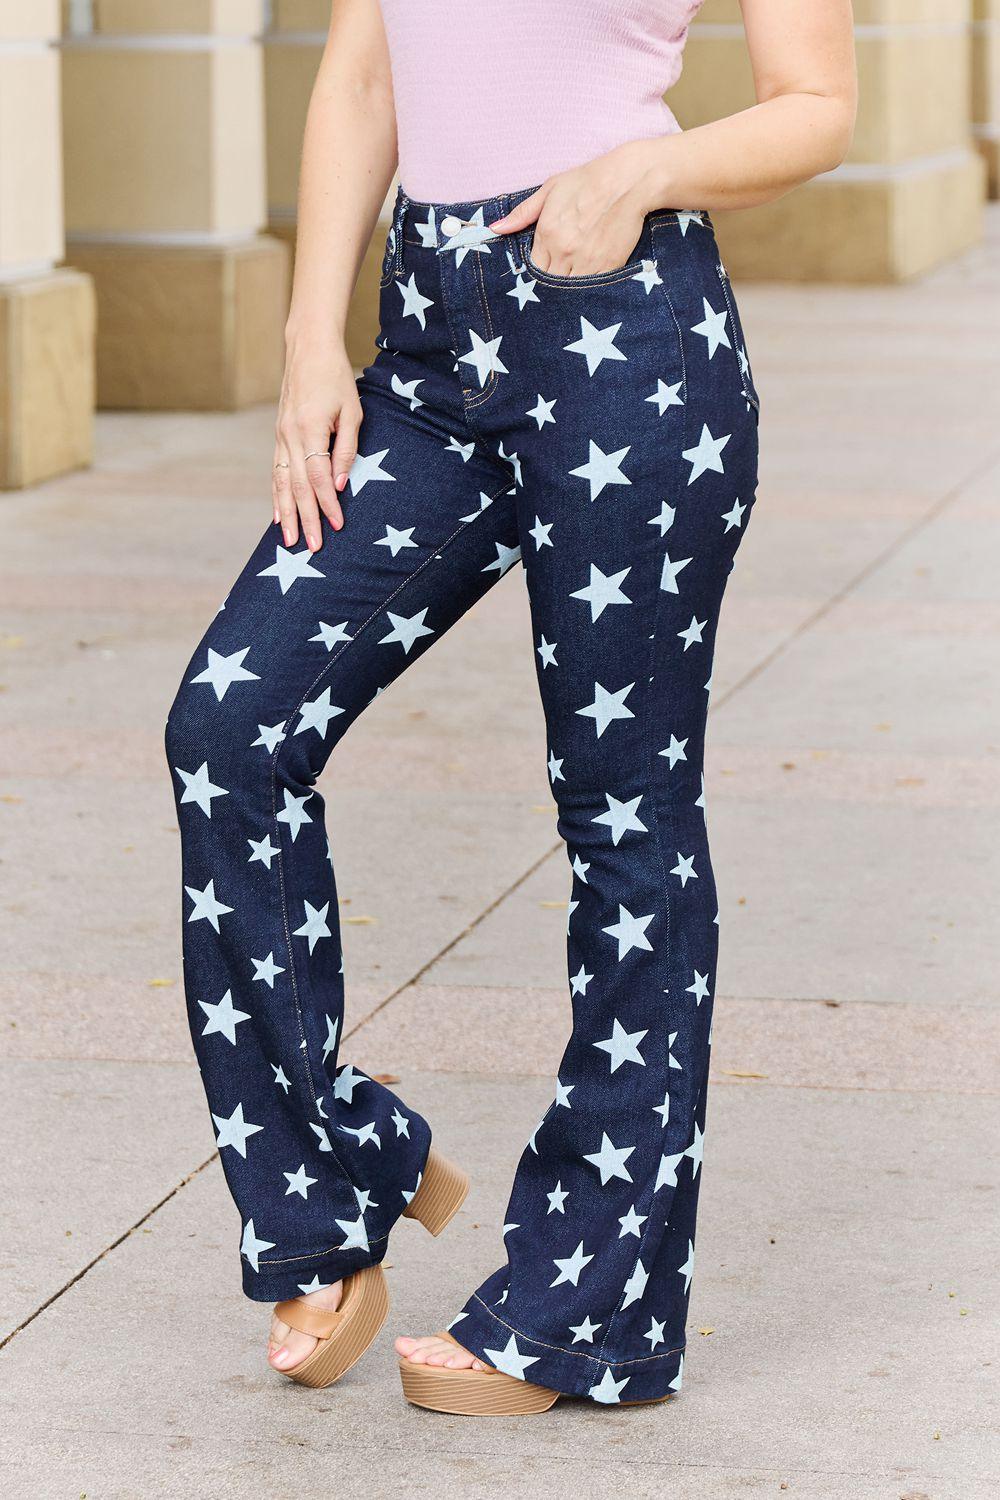 Judy Blue Janelle Full Size High Waist Star Print Flare Jeans - PEONIES & LIME